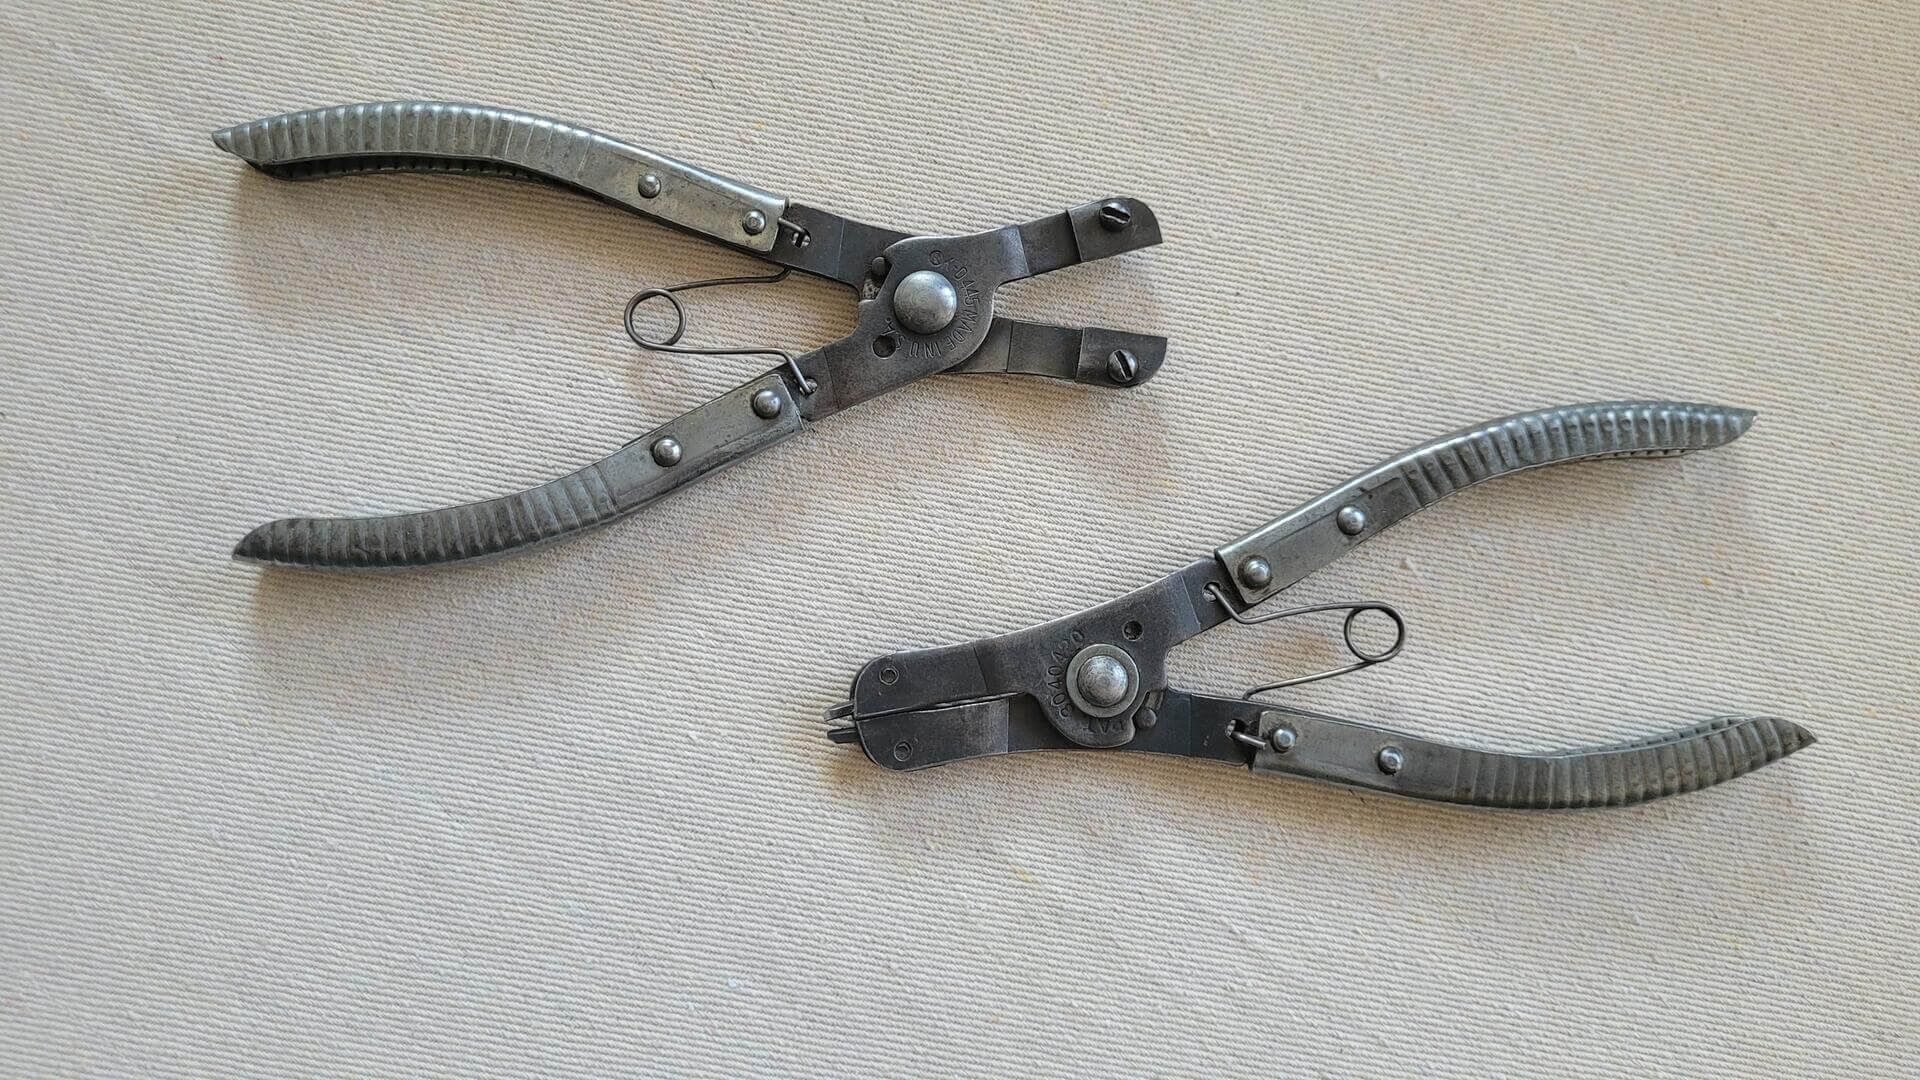 Vintage K-D Tools No. 445 & No. 446 retaining snap ring automotive pliers. Antique 1960s made in USA collectible mechanic hand tools Patent 3040420